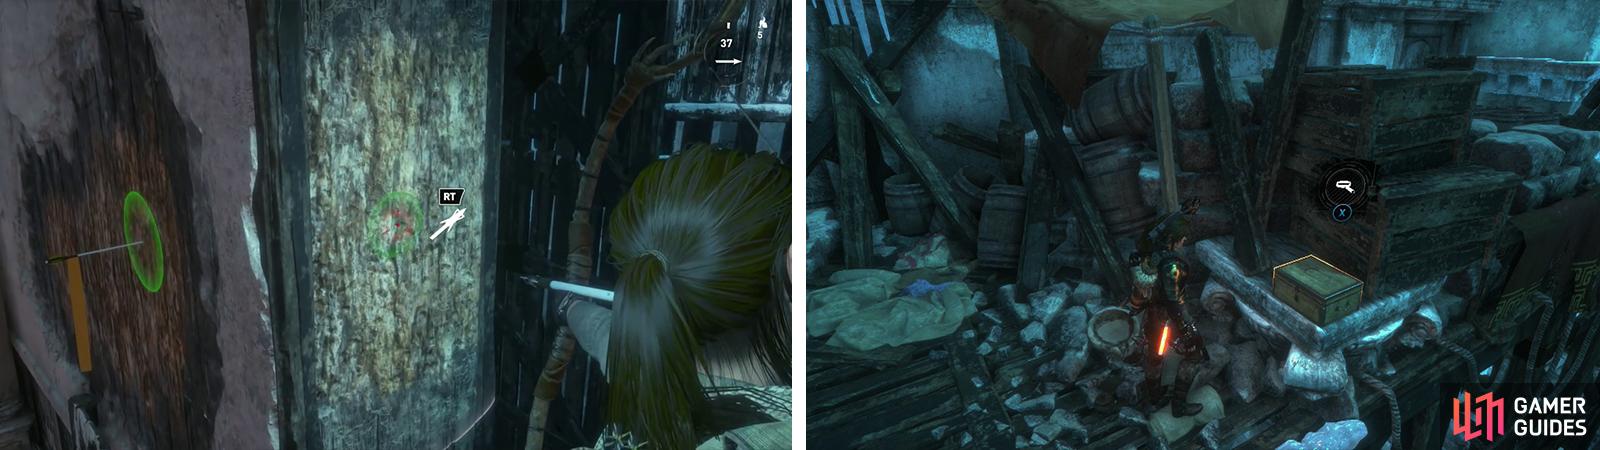 Use the Broadhead Arrows to climb the walls by the Base Camp (left). At the top youll find Relic 10 (right).